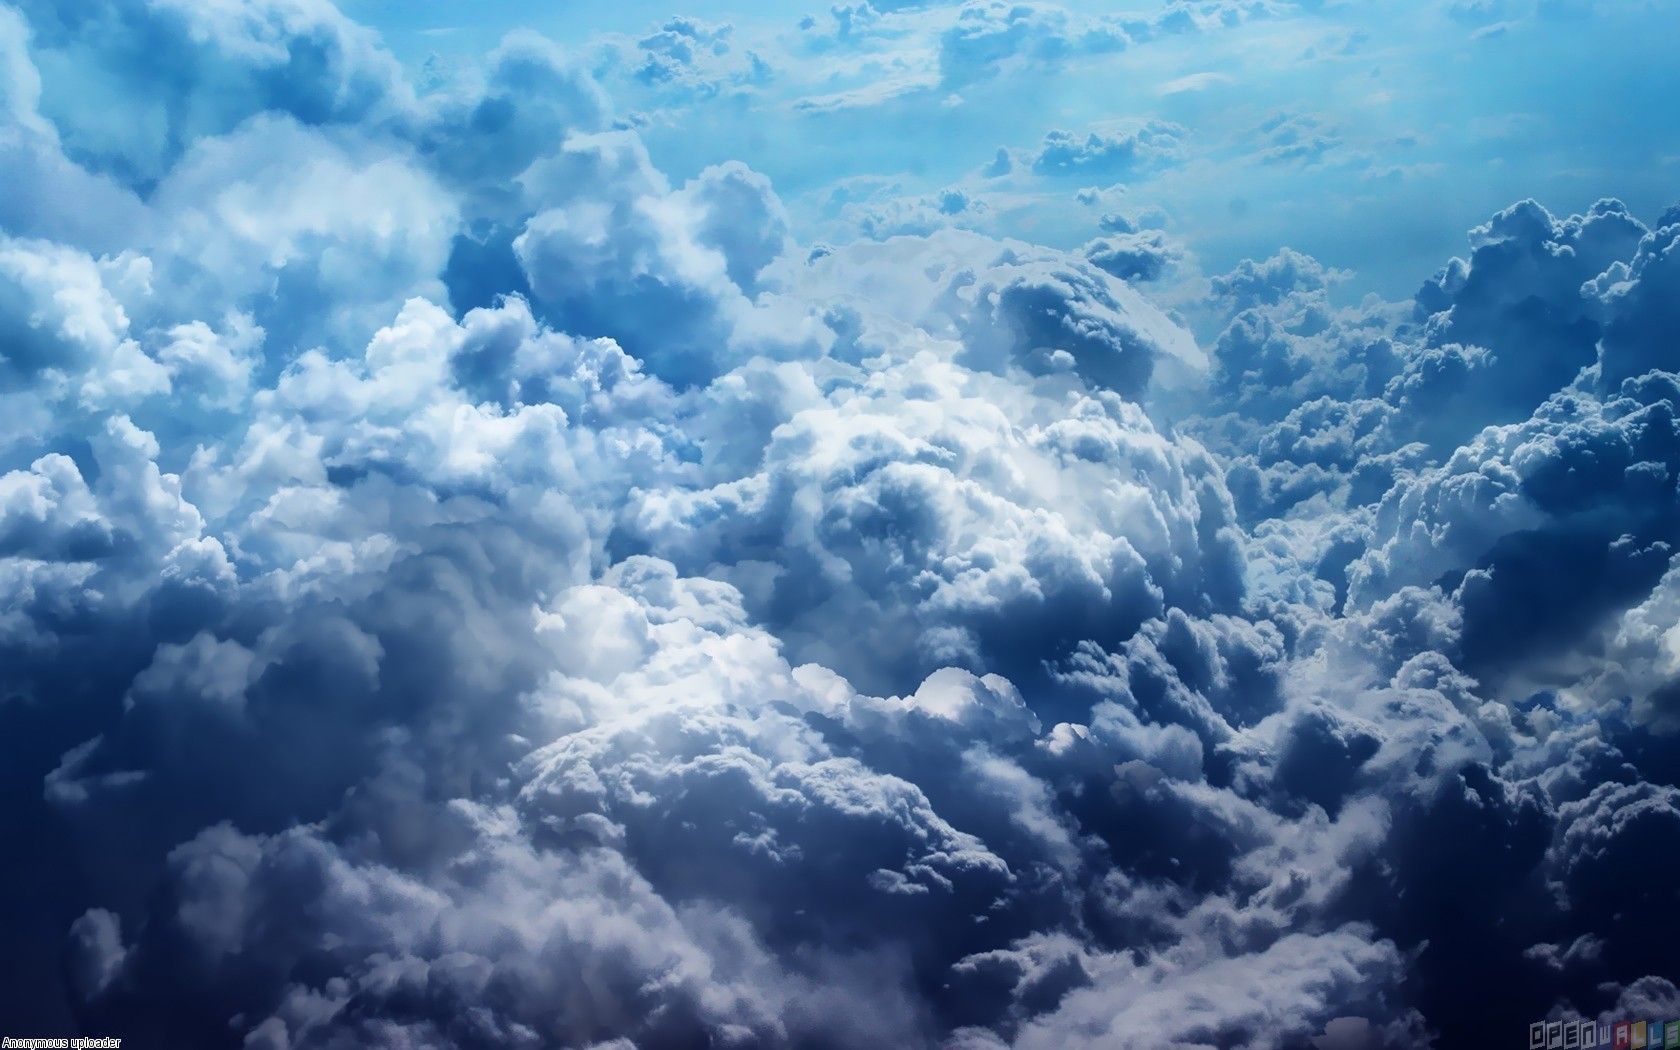 picture of clouds in the sky. Clouds in the sky wallpaper